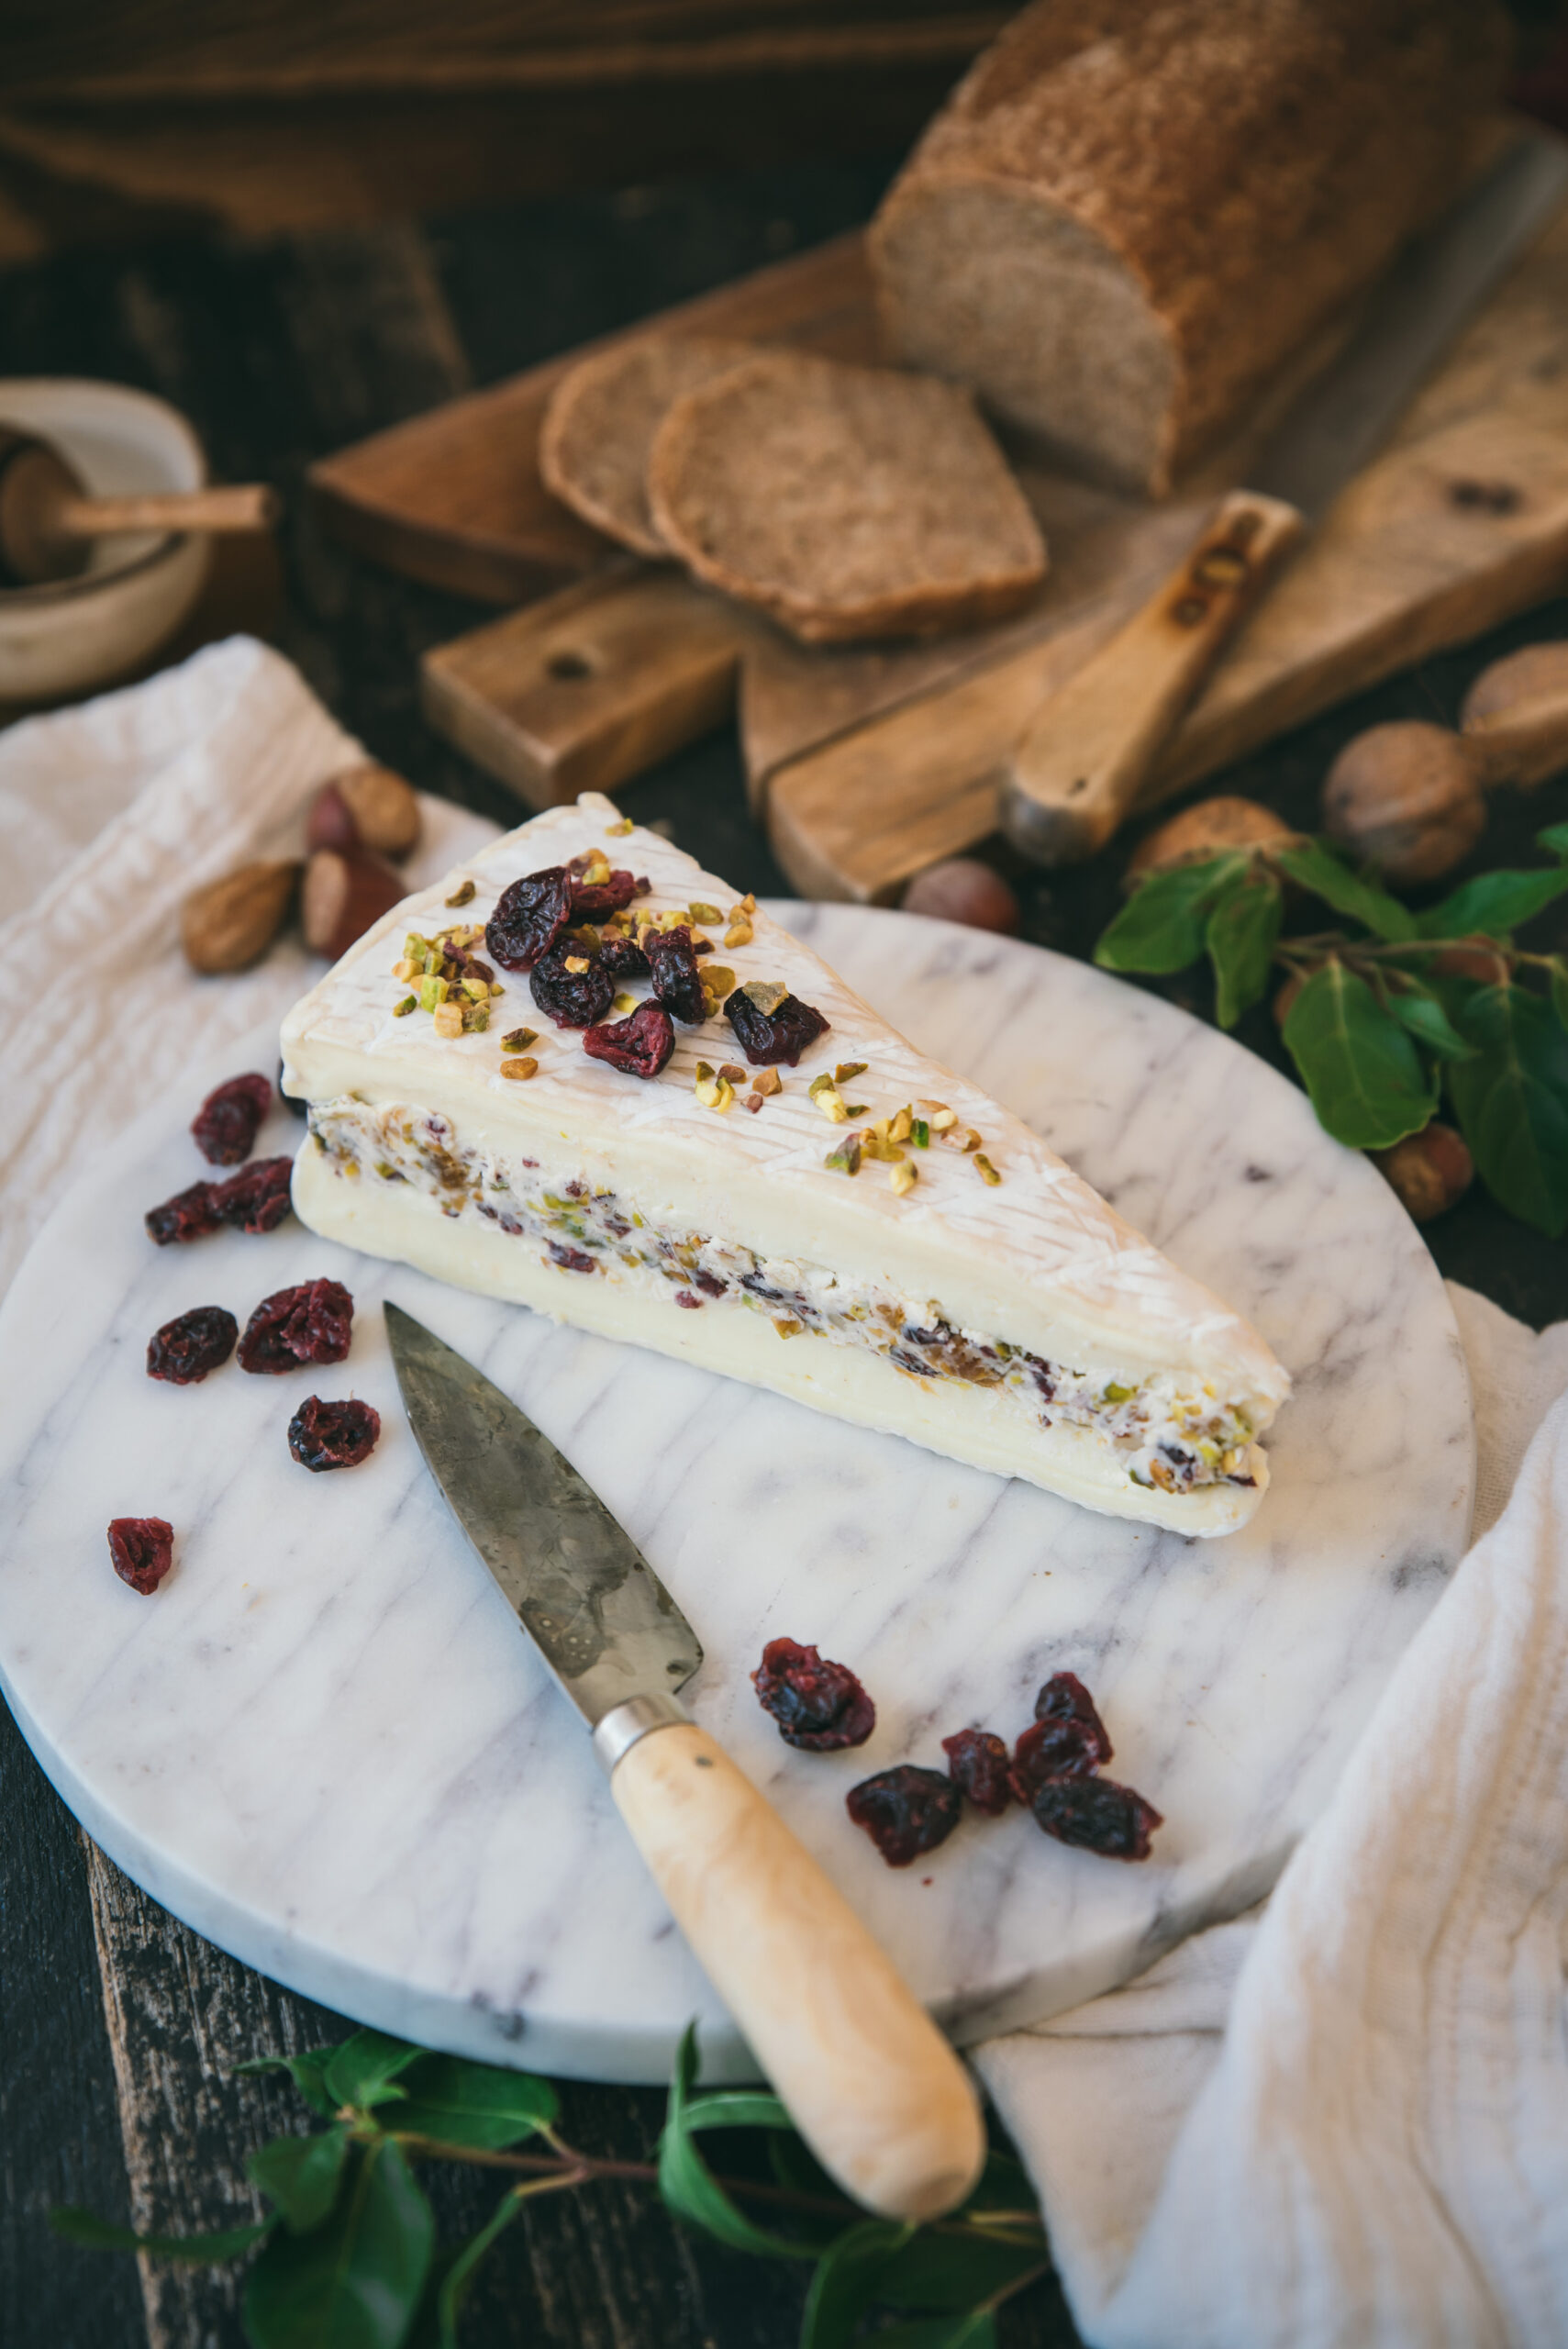 Brie Cheese Stuffed with Cranberries and Nuts